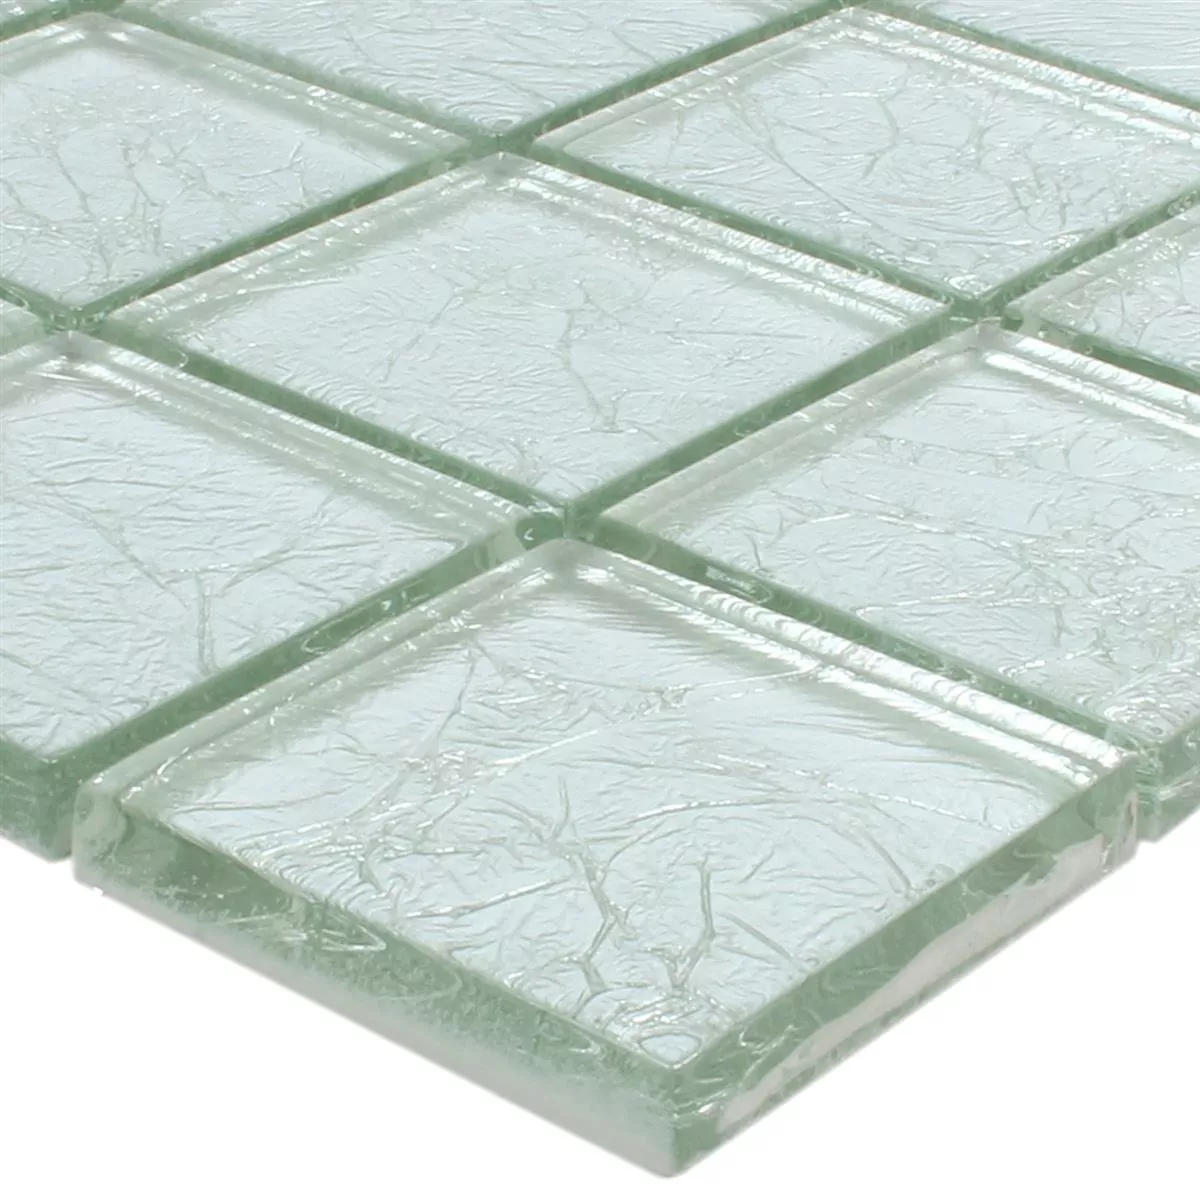 Mosaik Glas Lucca Silver 48x48x8mm